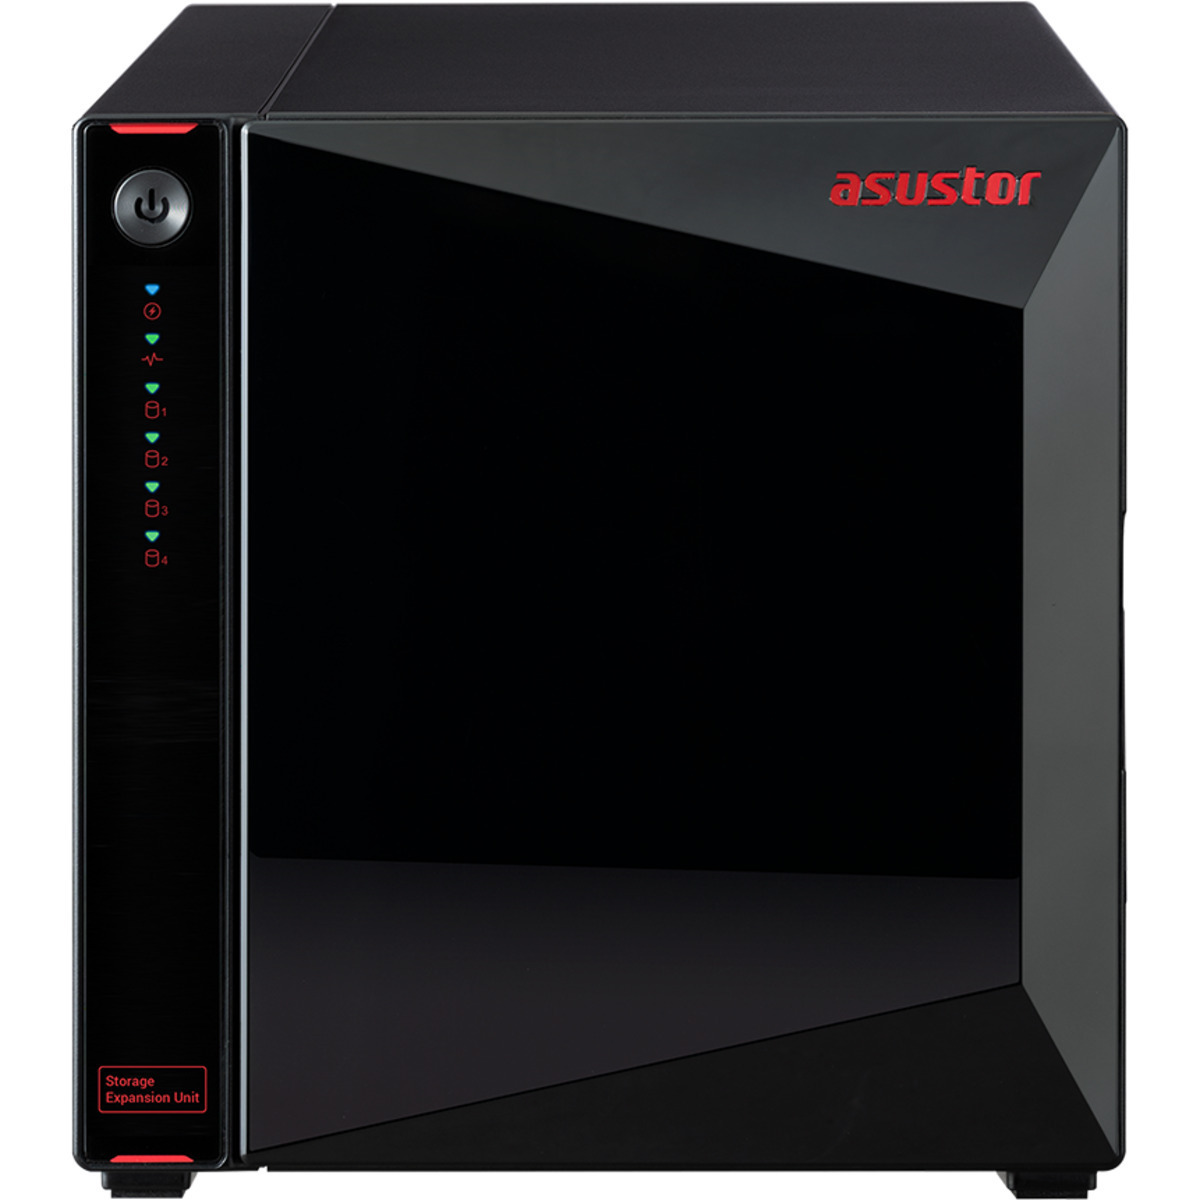 ASUSTOR AS5004U Expansion Enclosure Burn-In Tested Configurations